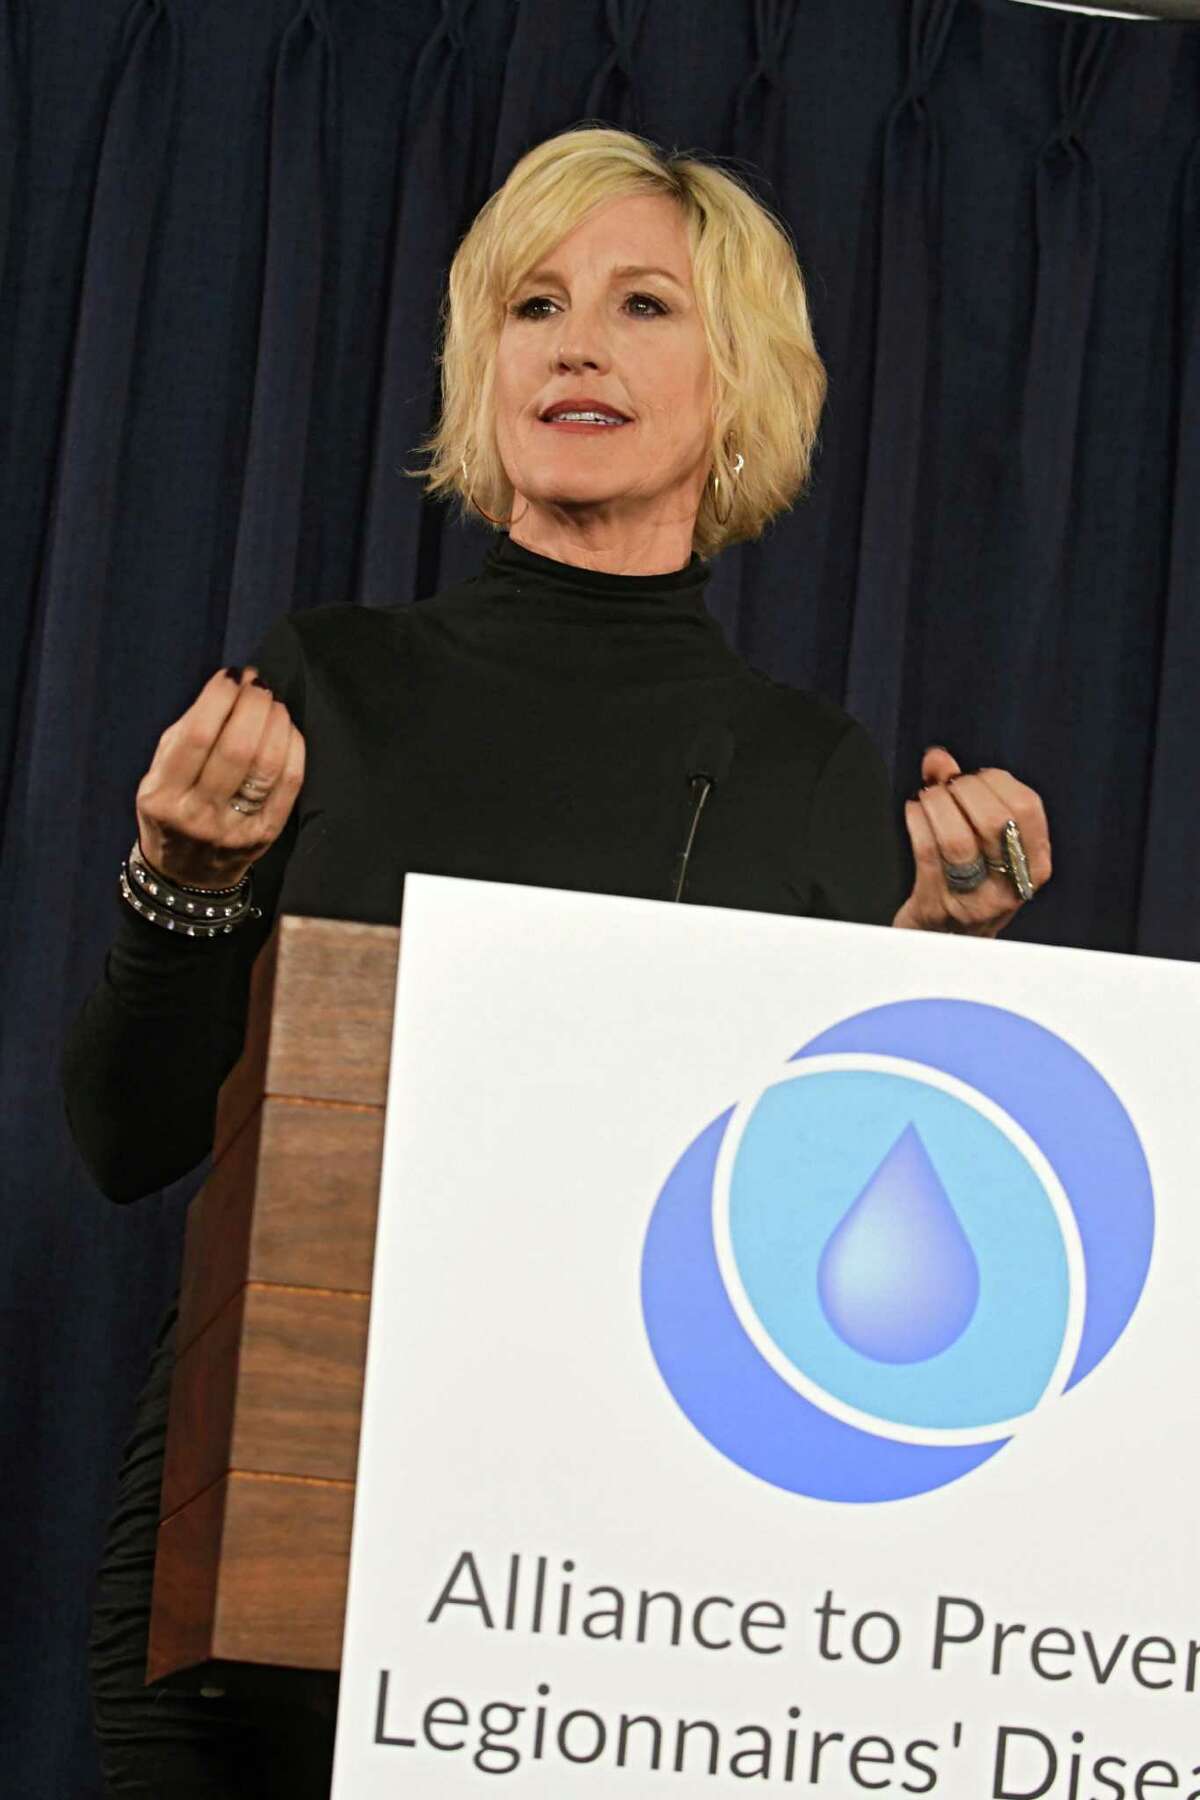 Public health and environmental advocate Erin Brockovich joins the Alliance to Prevent Legionnaires' Disease and the Allergy and Asthma Network as they hold a press conference at the Legislative Office Building on Tuesday, Jan. 24, 2017 in Albany, N.Y. The advocates are calingl on lawmakers and health officials to work towards real, effective solutions to New York's escalating Legionella and Legionnaires' disease crises. (Lori Van Buren / Times Union)